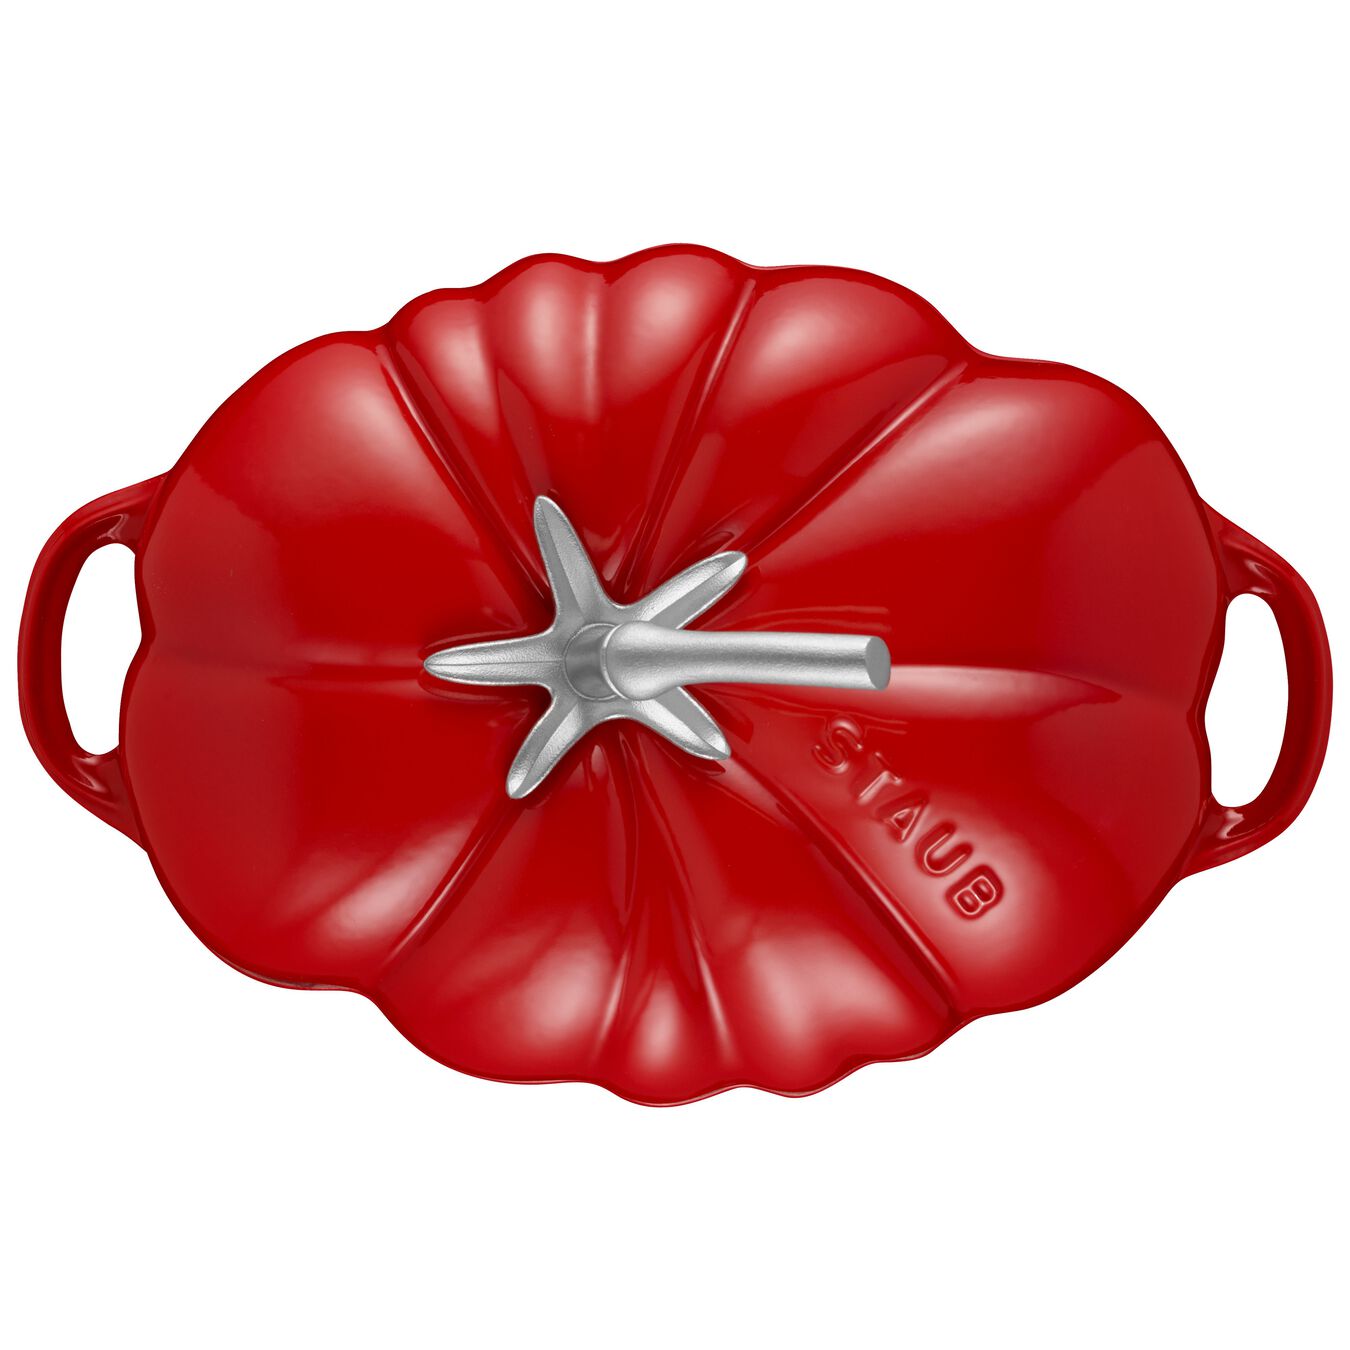 Cocotte 25 cm, Tomate, Kirsch-Rot, Gusseisen,,large 4